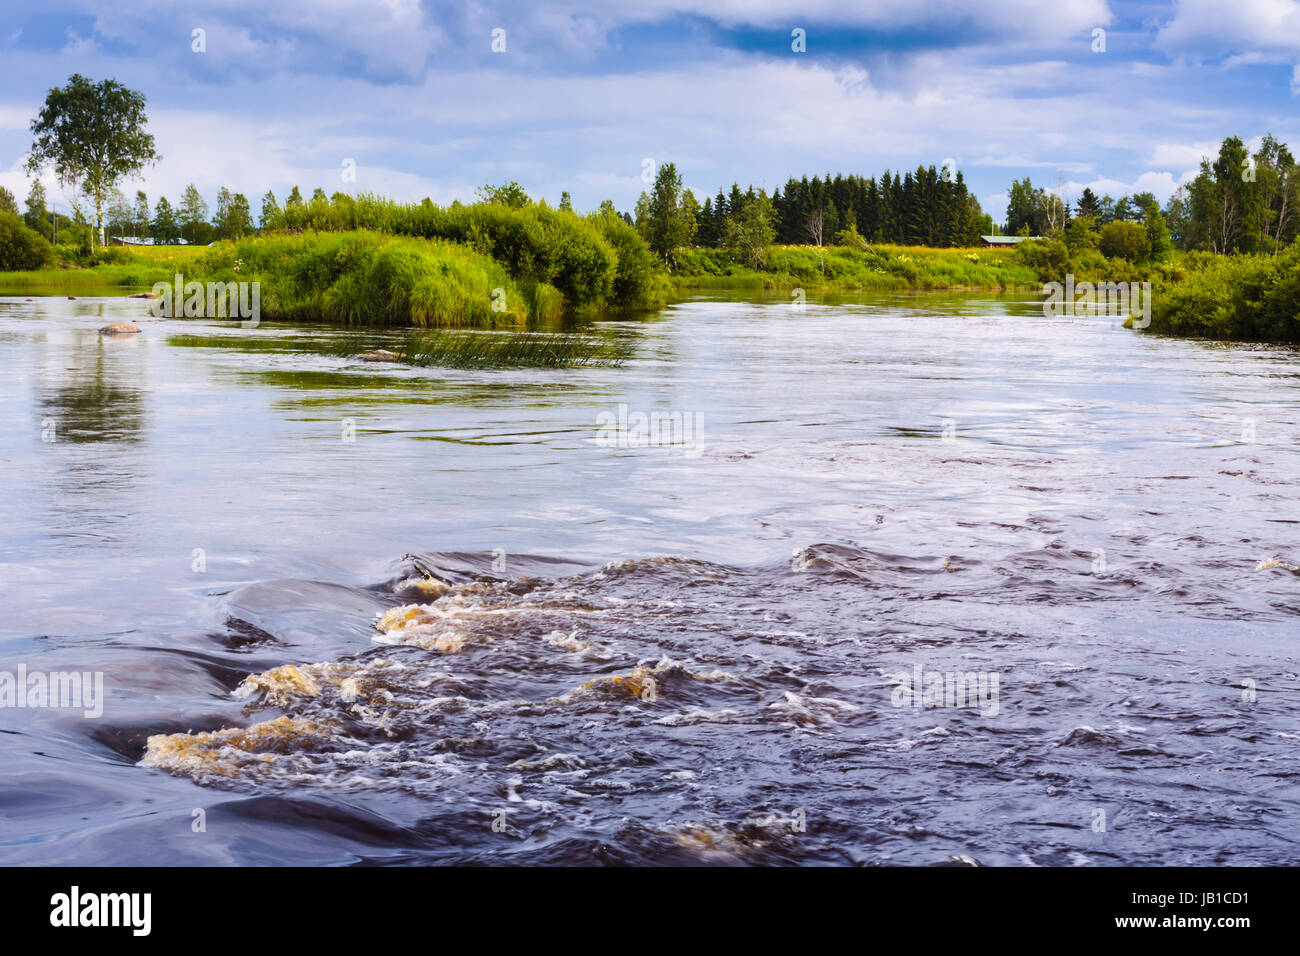 A beautiful summer day by the river Pyhajoki in the Nortern Finland. Stock Photo